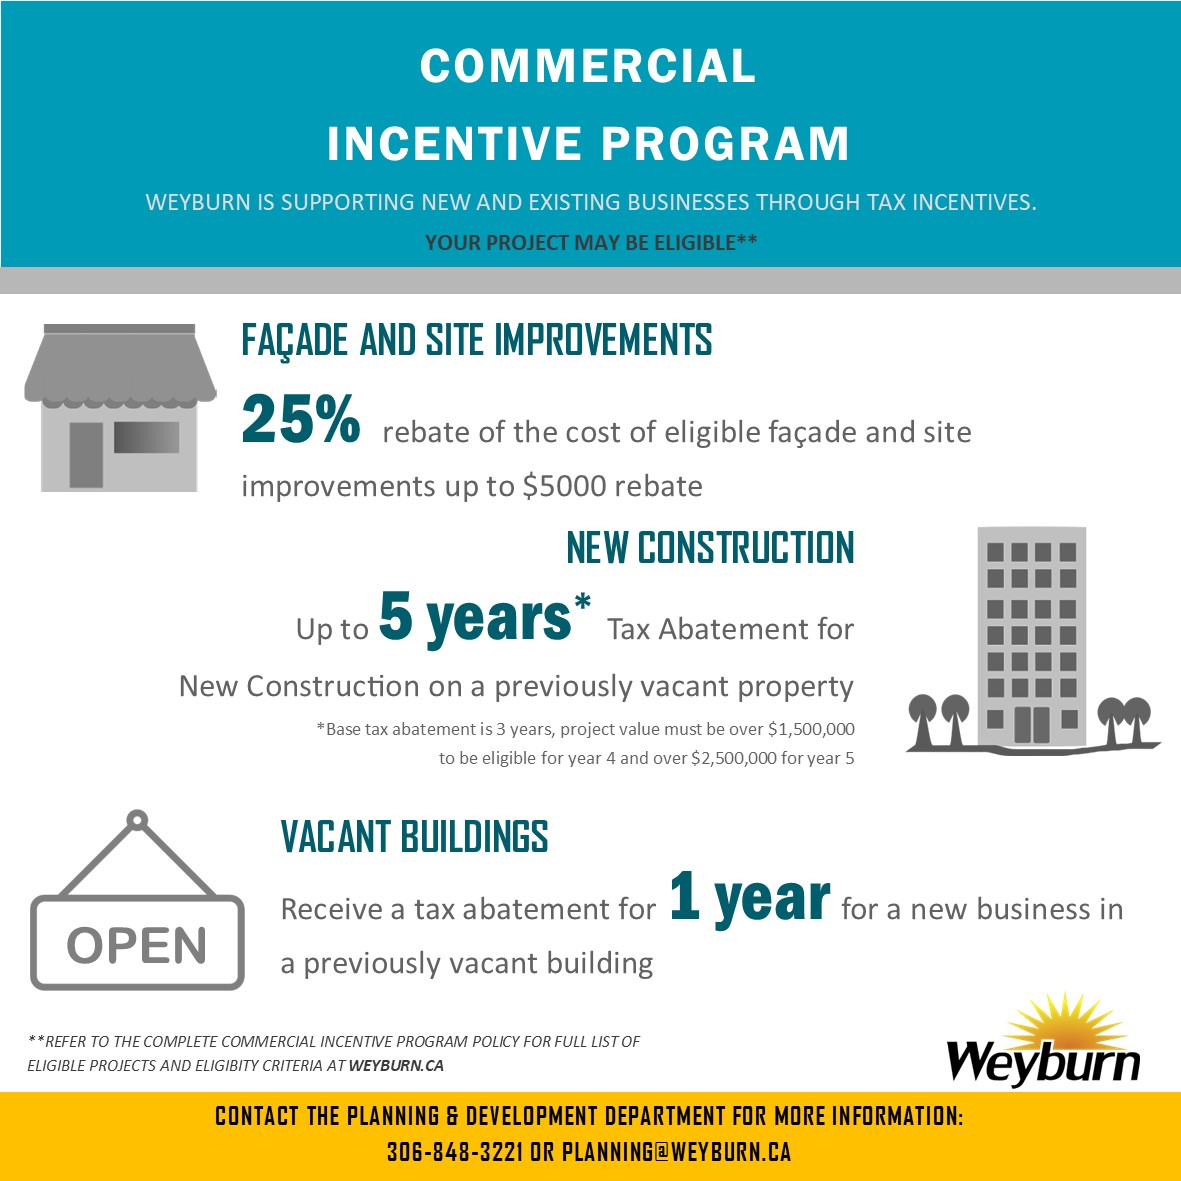 City of Weyburn announces Commercial Incentive Program